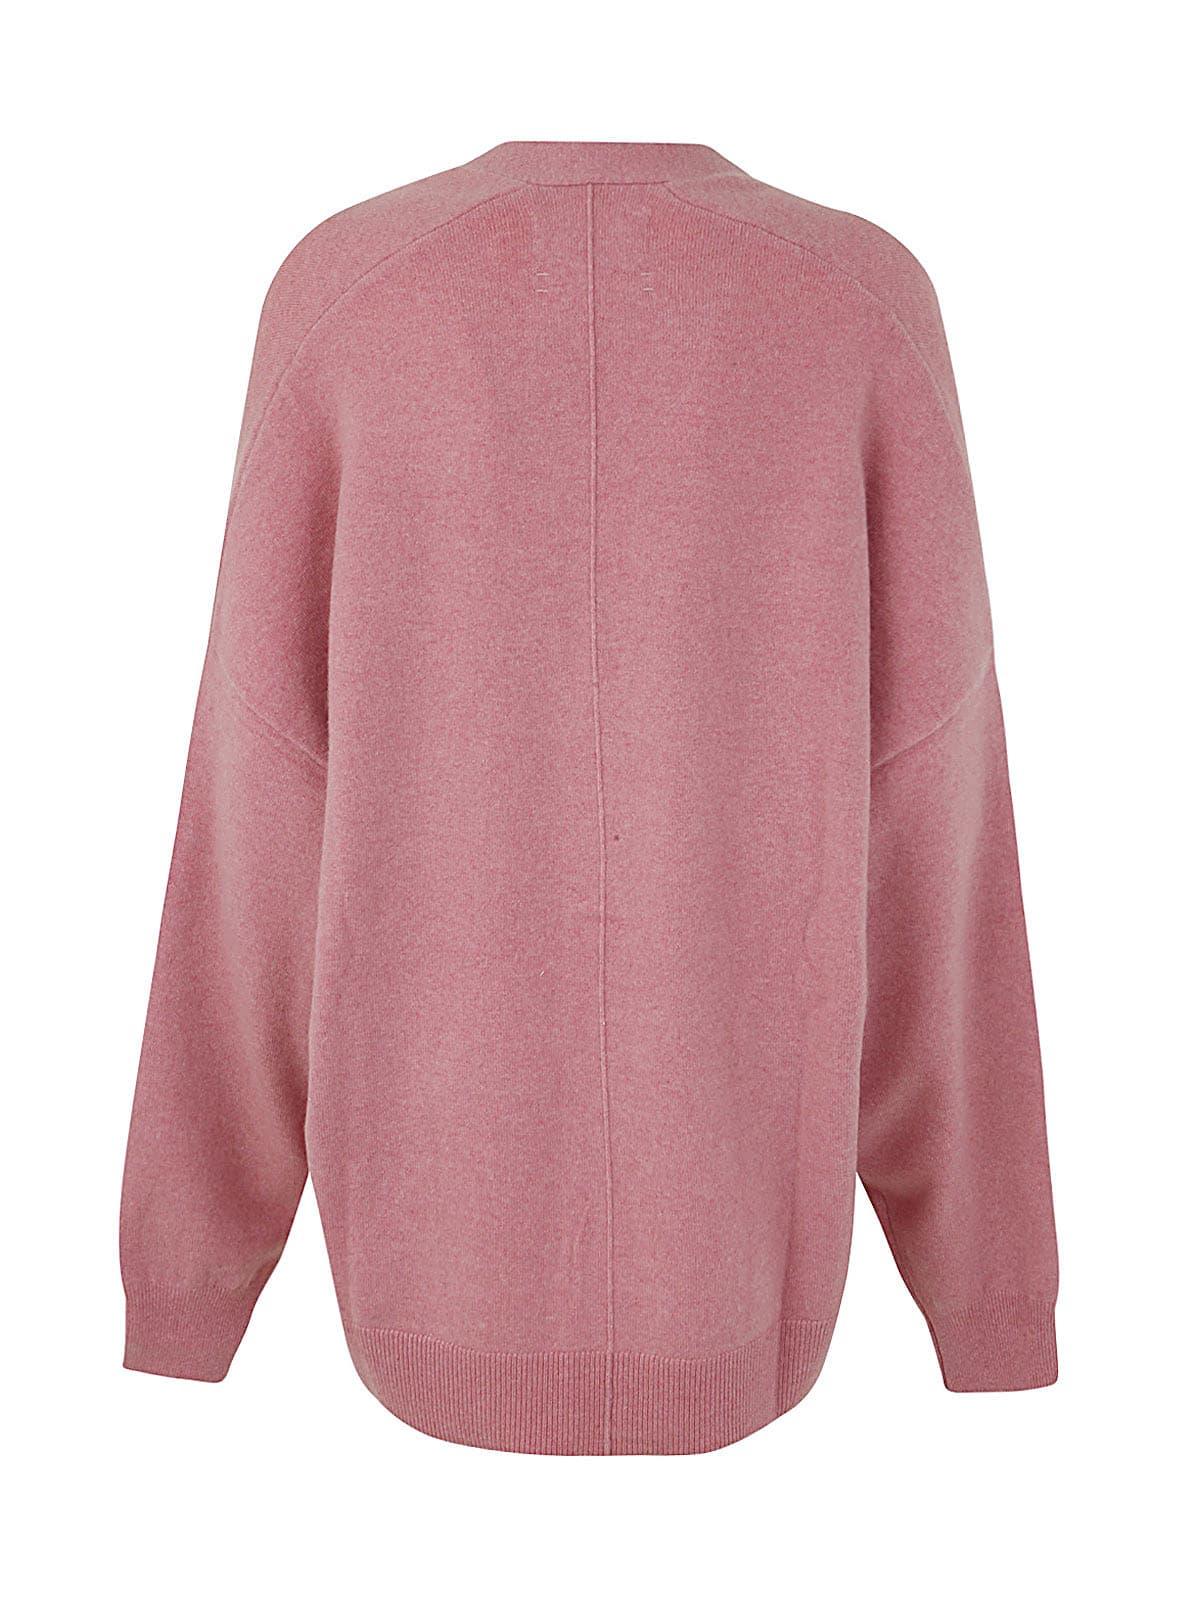 Womens Jumpers and knitwear Extreme Cashmere Jumpers and knitwear Extreme Cashmere N° 24 Tokio Cashmere-blend Cardigan in Pink 